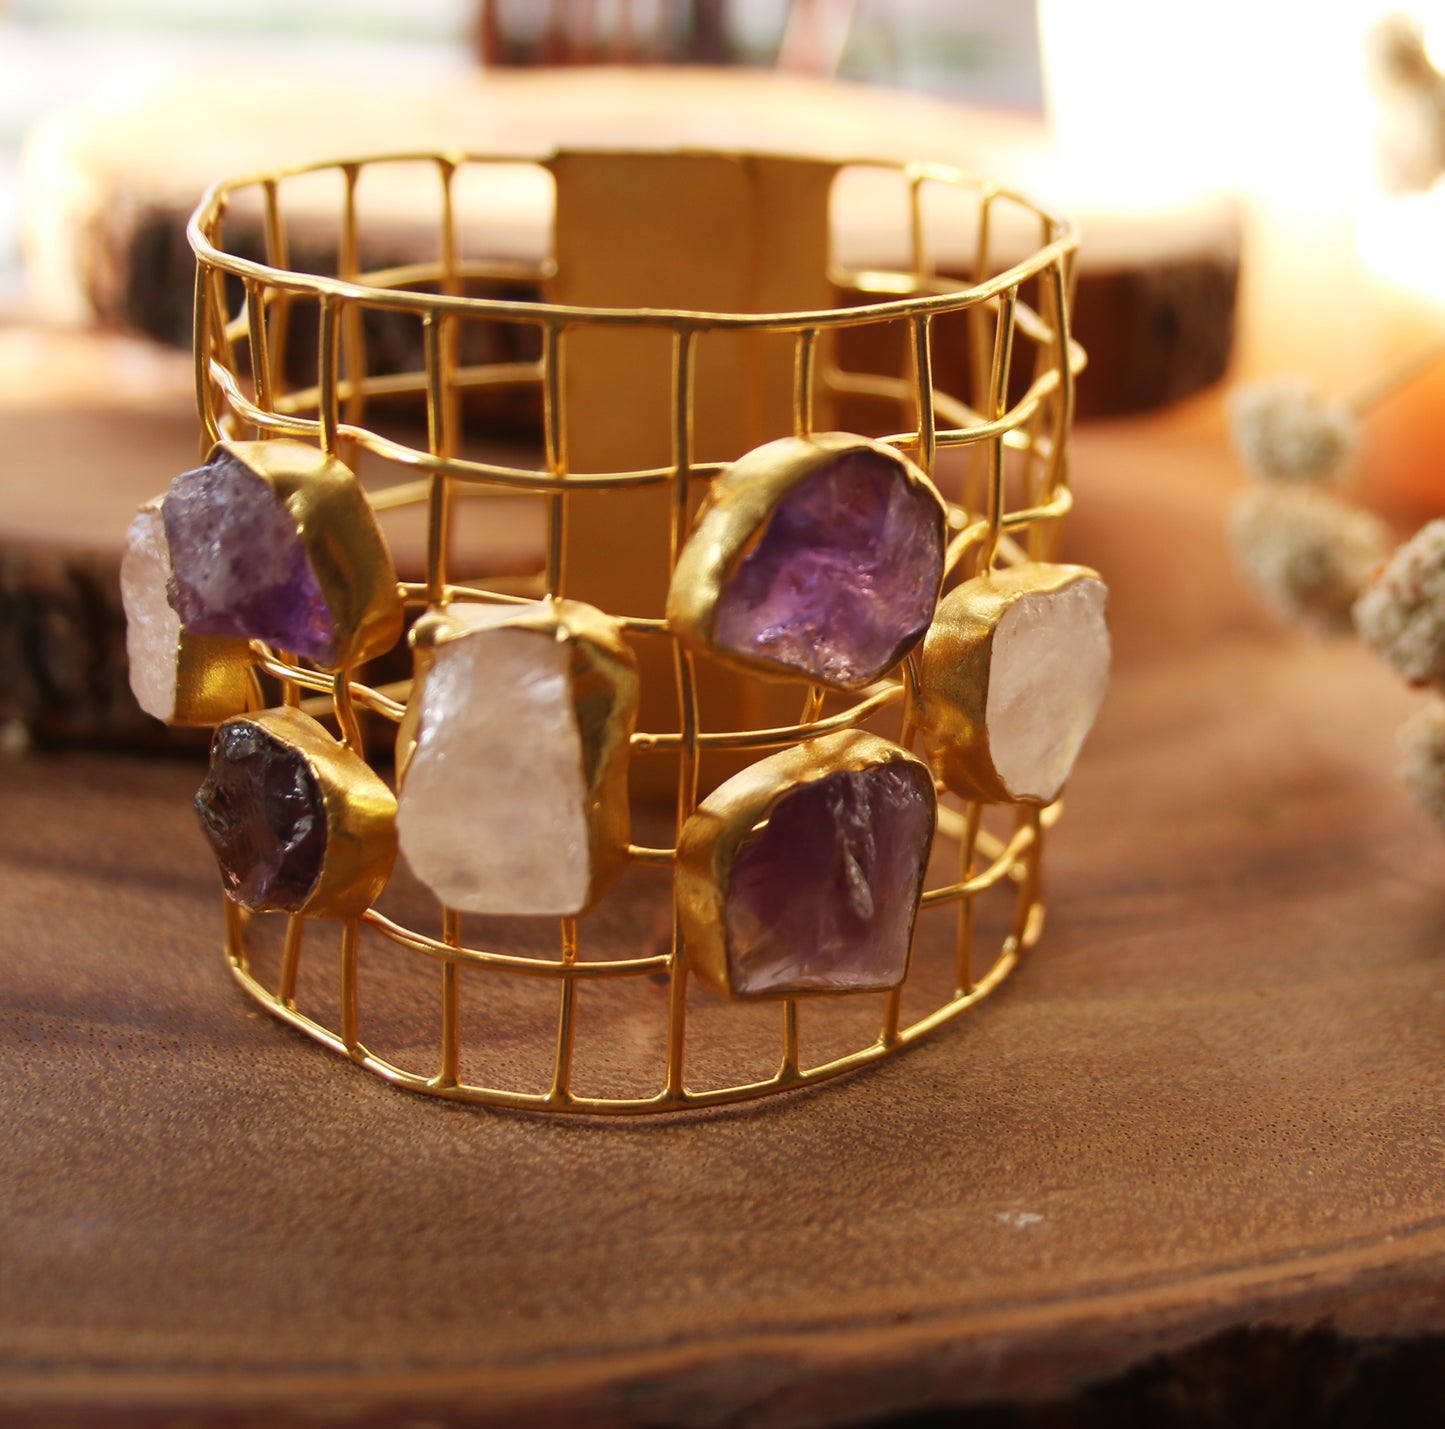 CAGE CUFF WITH NATURAL STONES - The Glam Harbor